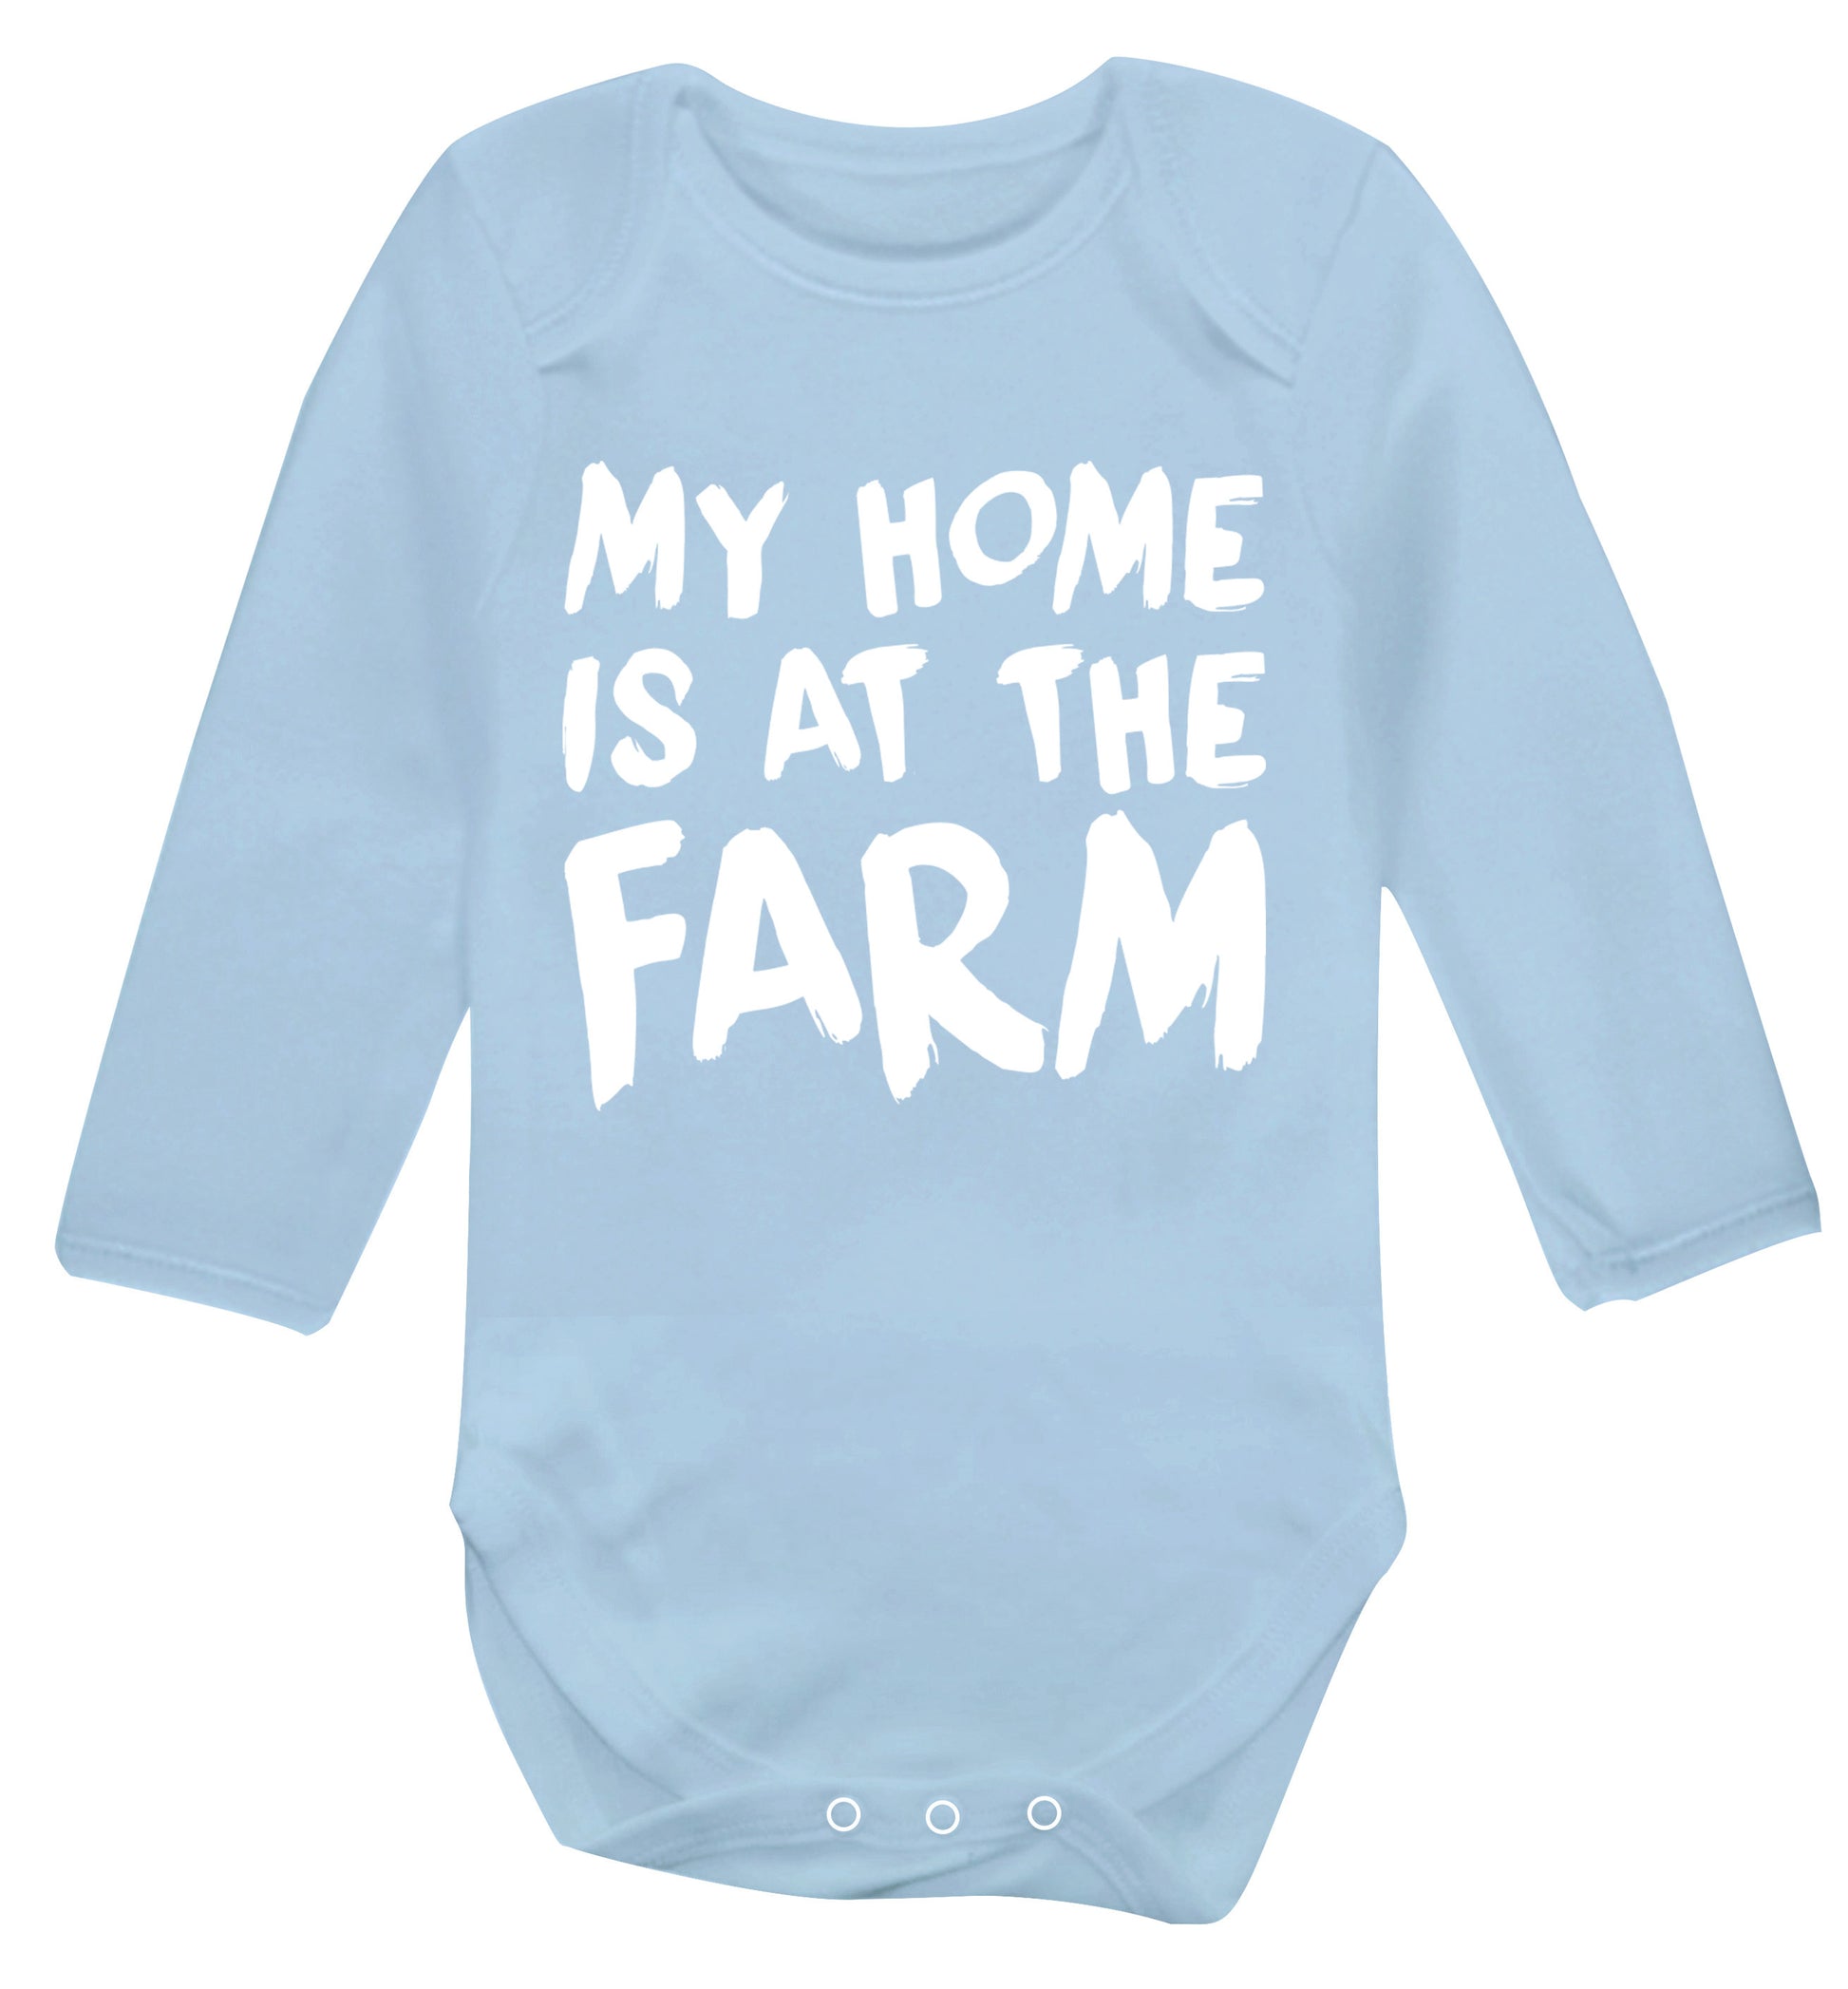 My home is at the farm Baby Vest long sleeved pale blue 6-12 months